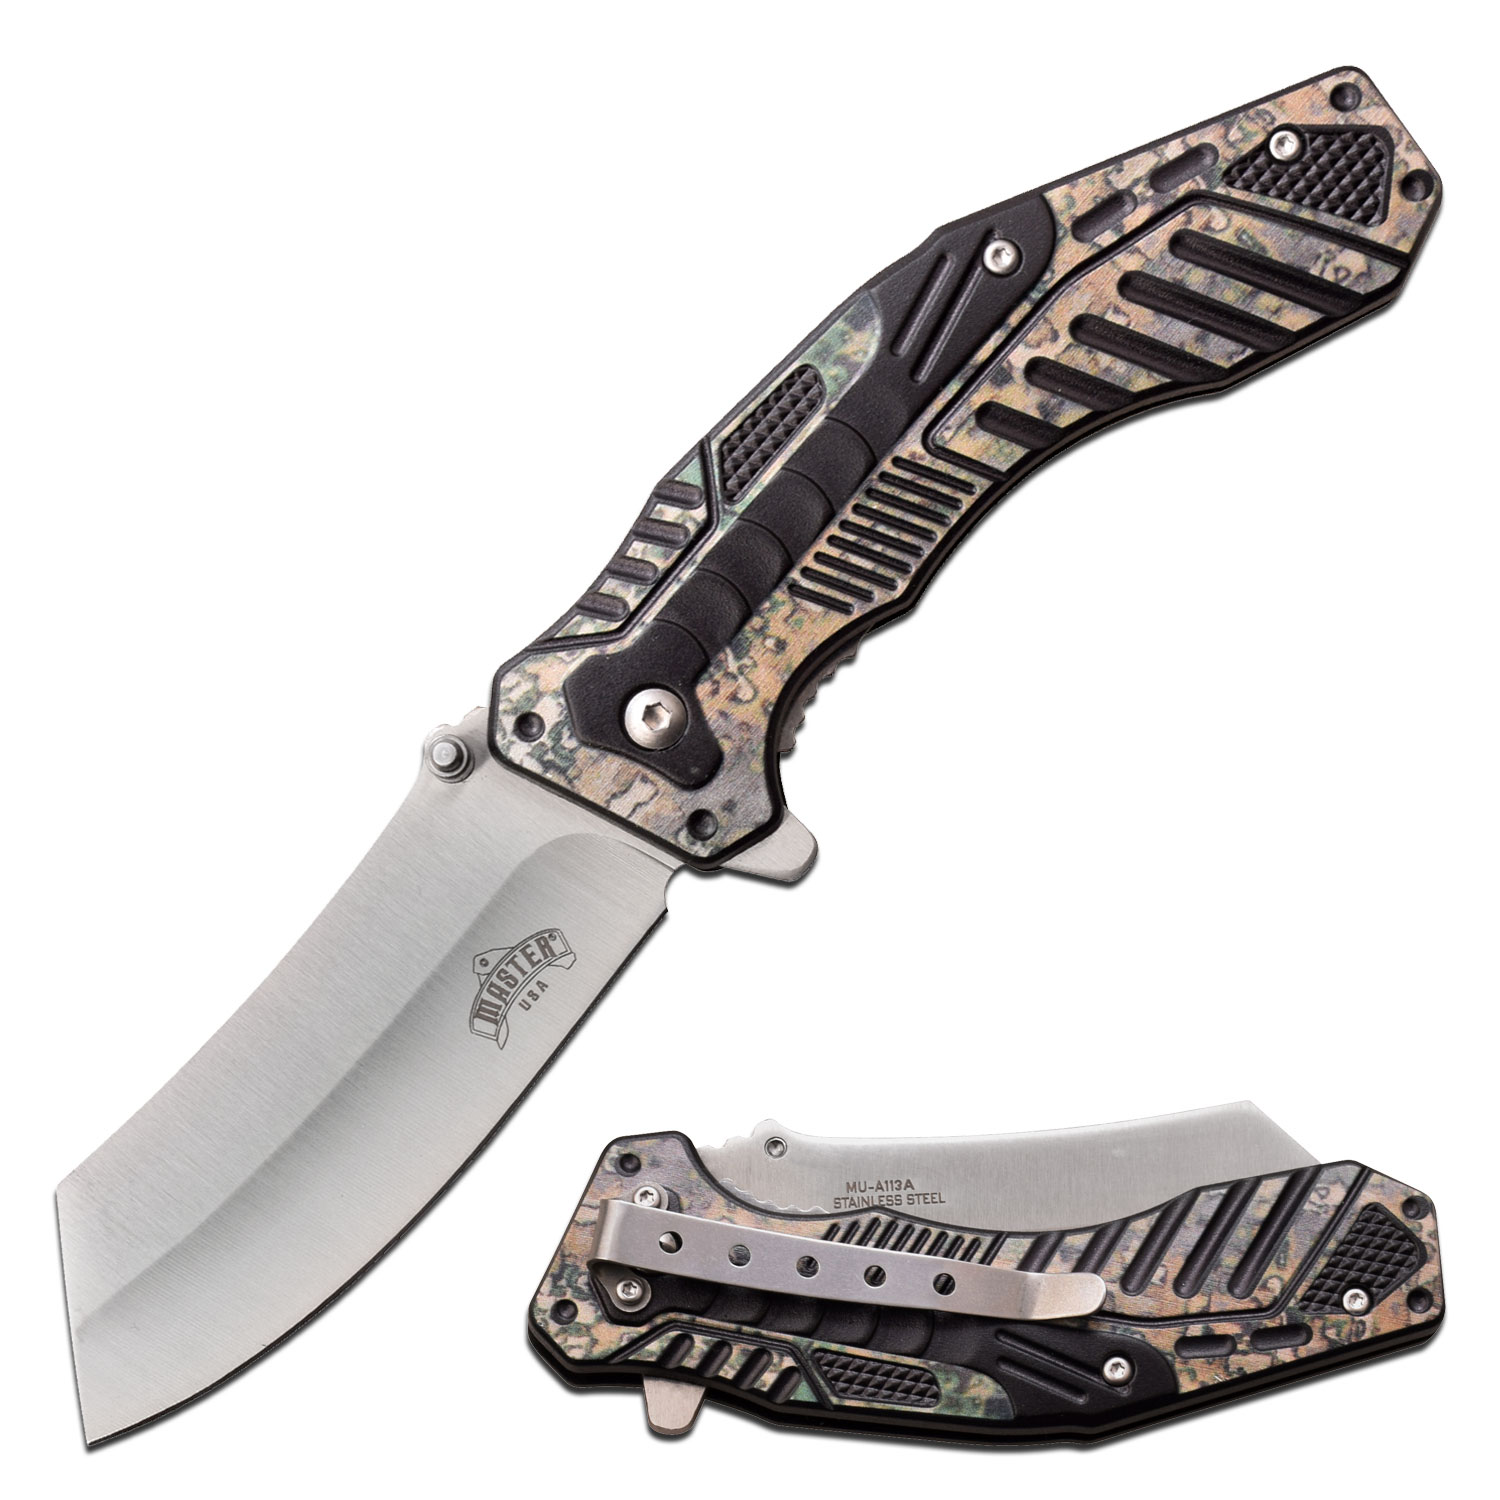 Spring-Assist Folding Knife Mtech Cleaver 3.25In Blade Black Tan Camo Tactical